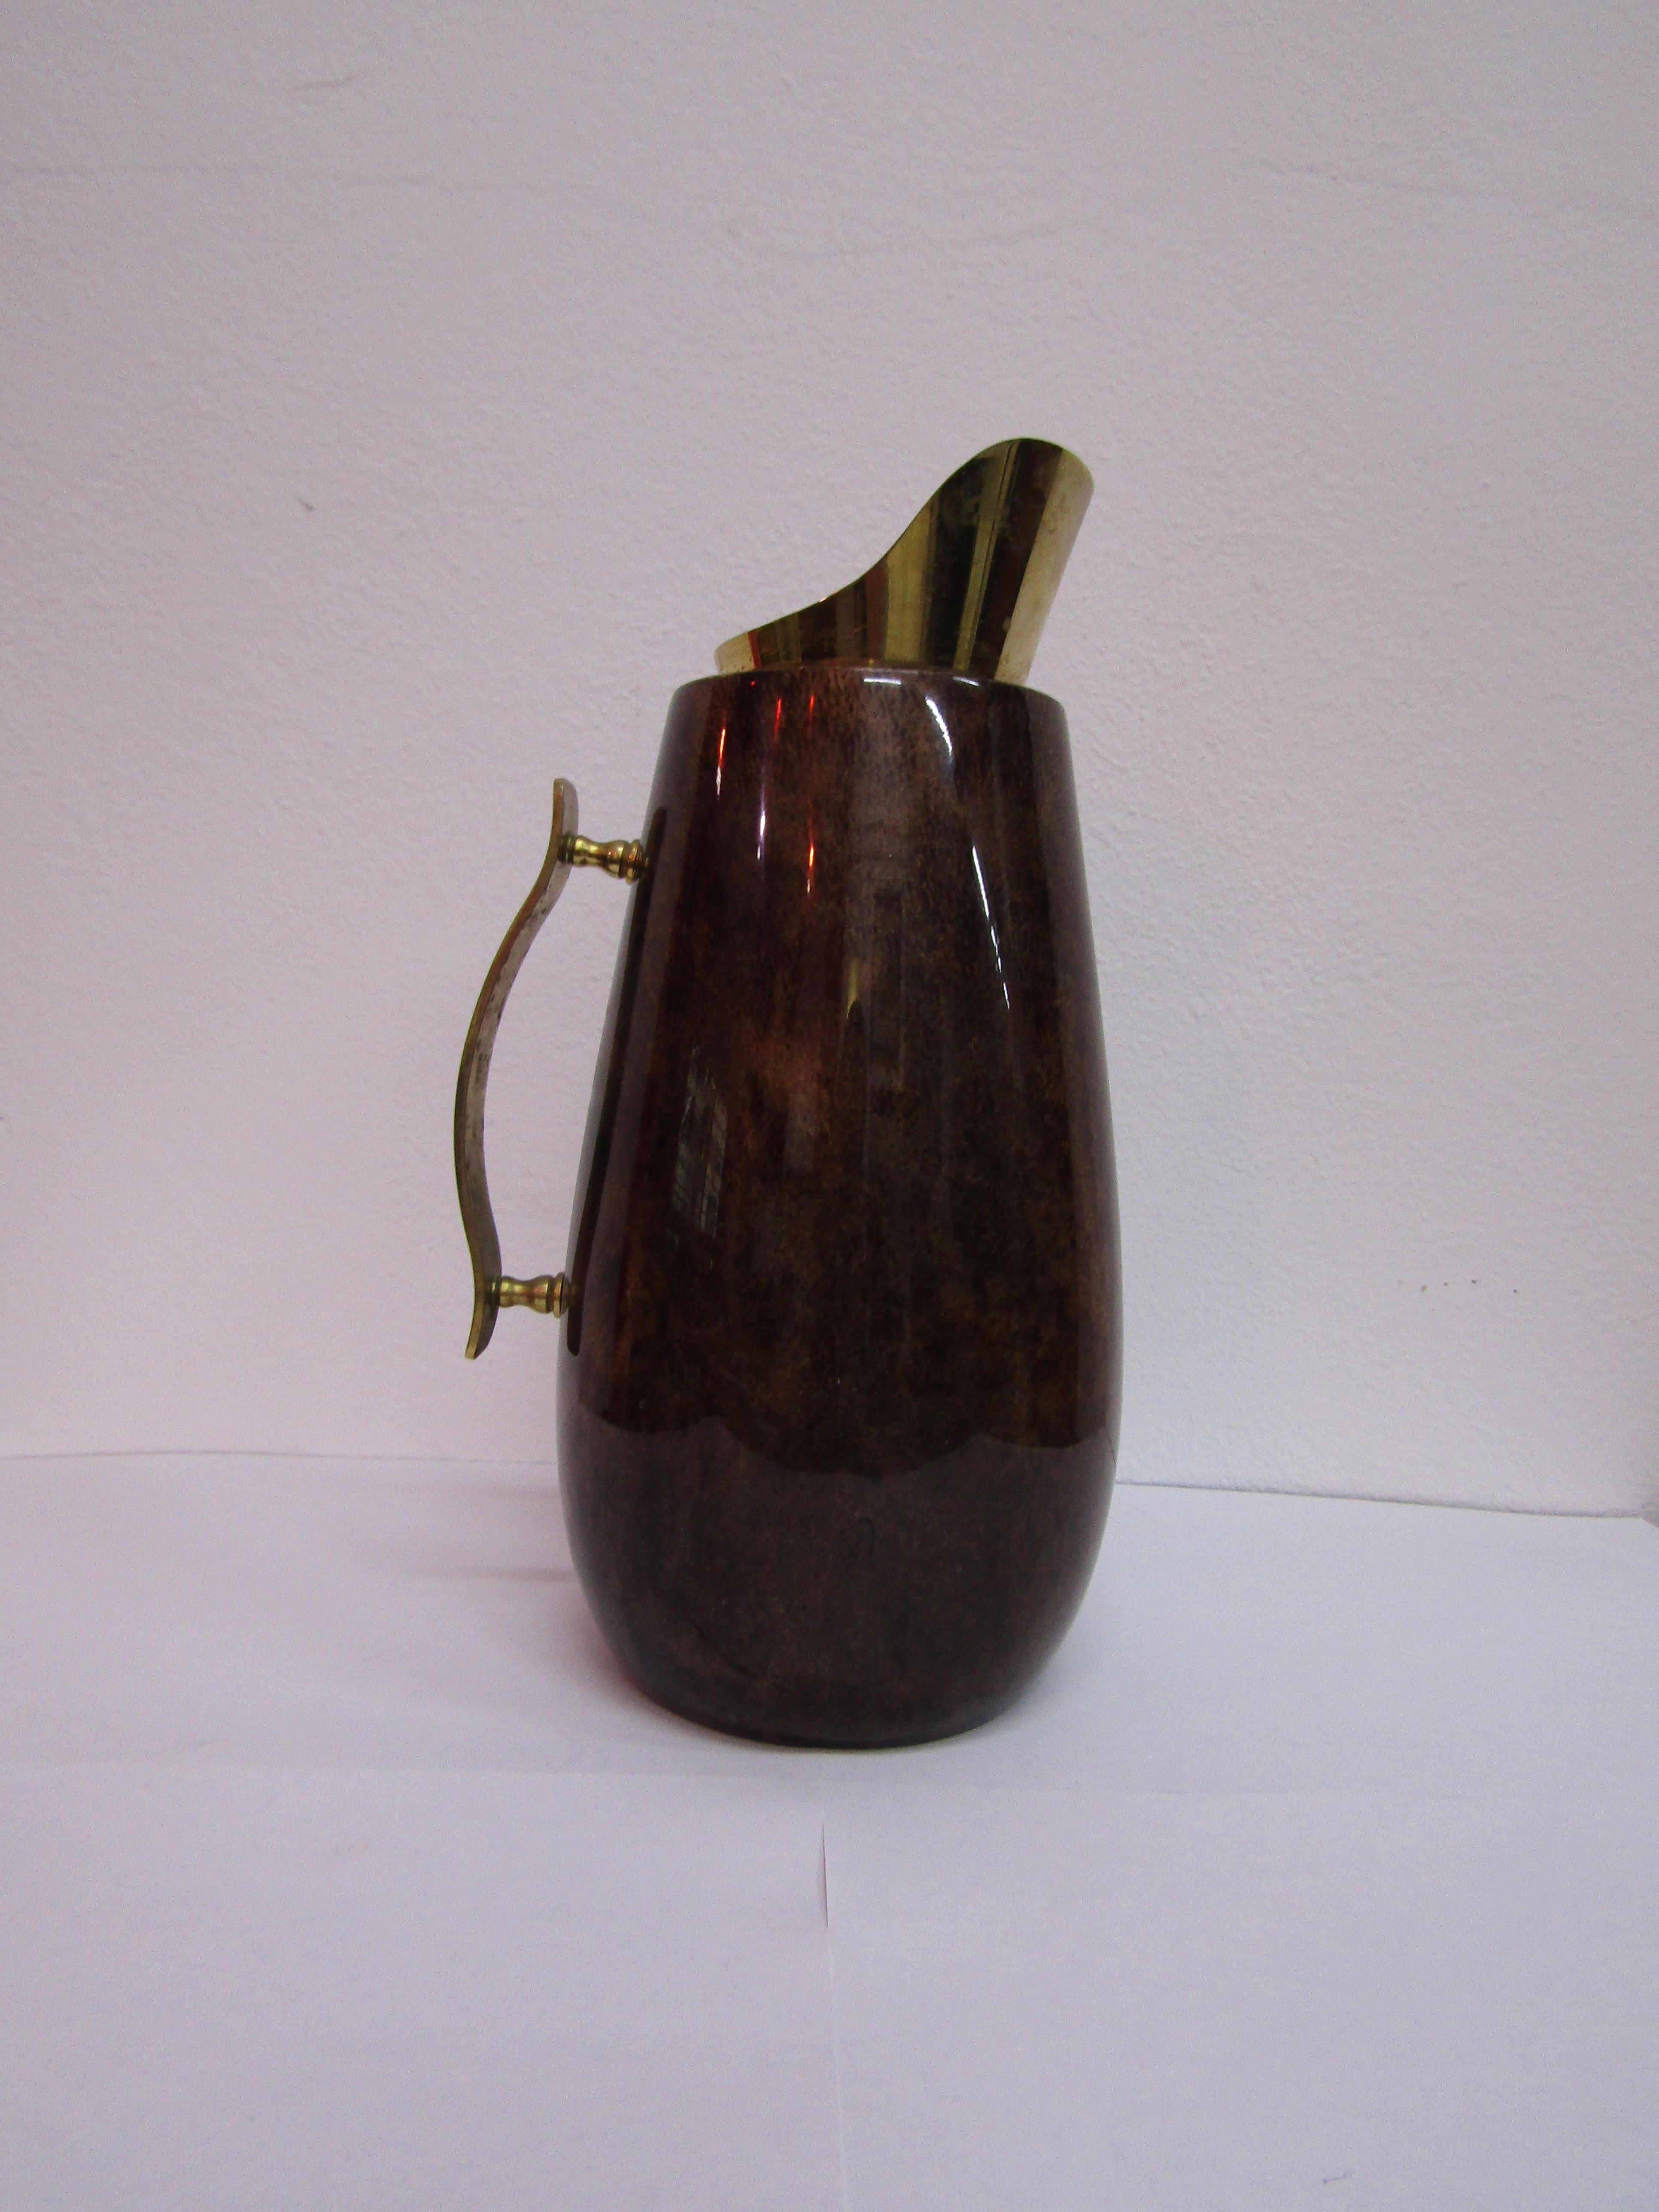 Parchment wooden carafe with brass handle and jug. The carafe still has its original label. Created by Aldo Tura, in Italy in the midcentury

Aldo Tura was not an experimental furniture designer who has been involved in the manual production of